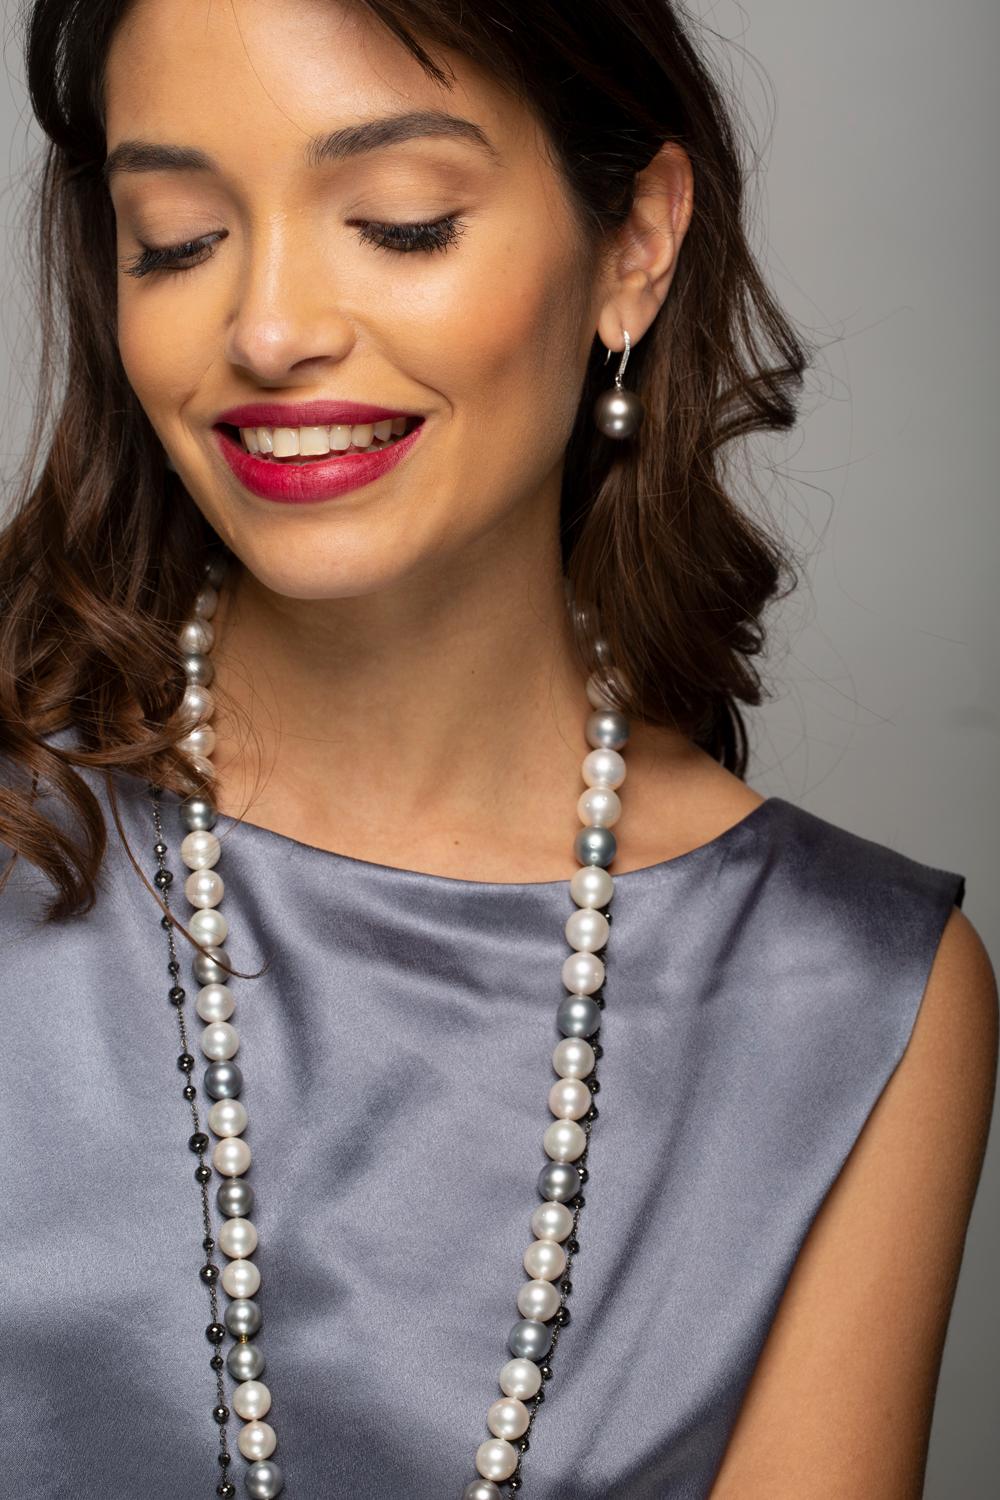 Alex Jona long pearl necklace composed by 47 South Sea pearls alternating with 20 light grey Tahiti pearls ranging from 11 to 13 mm / 0.43 in-0.51 in diameter, total length: 32.68 inch/83 cm), strung on a hand-knotted silk cord and secured by a